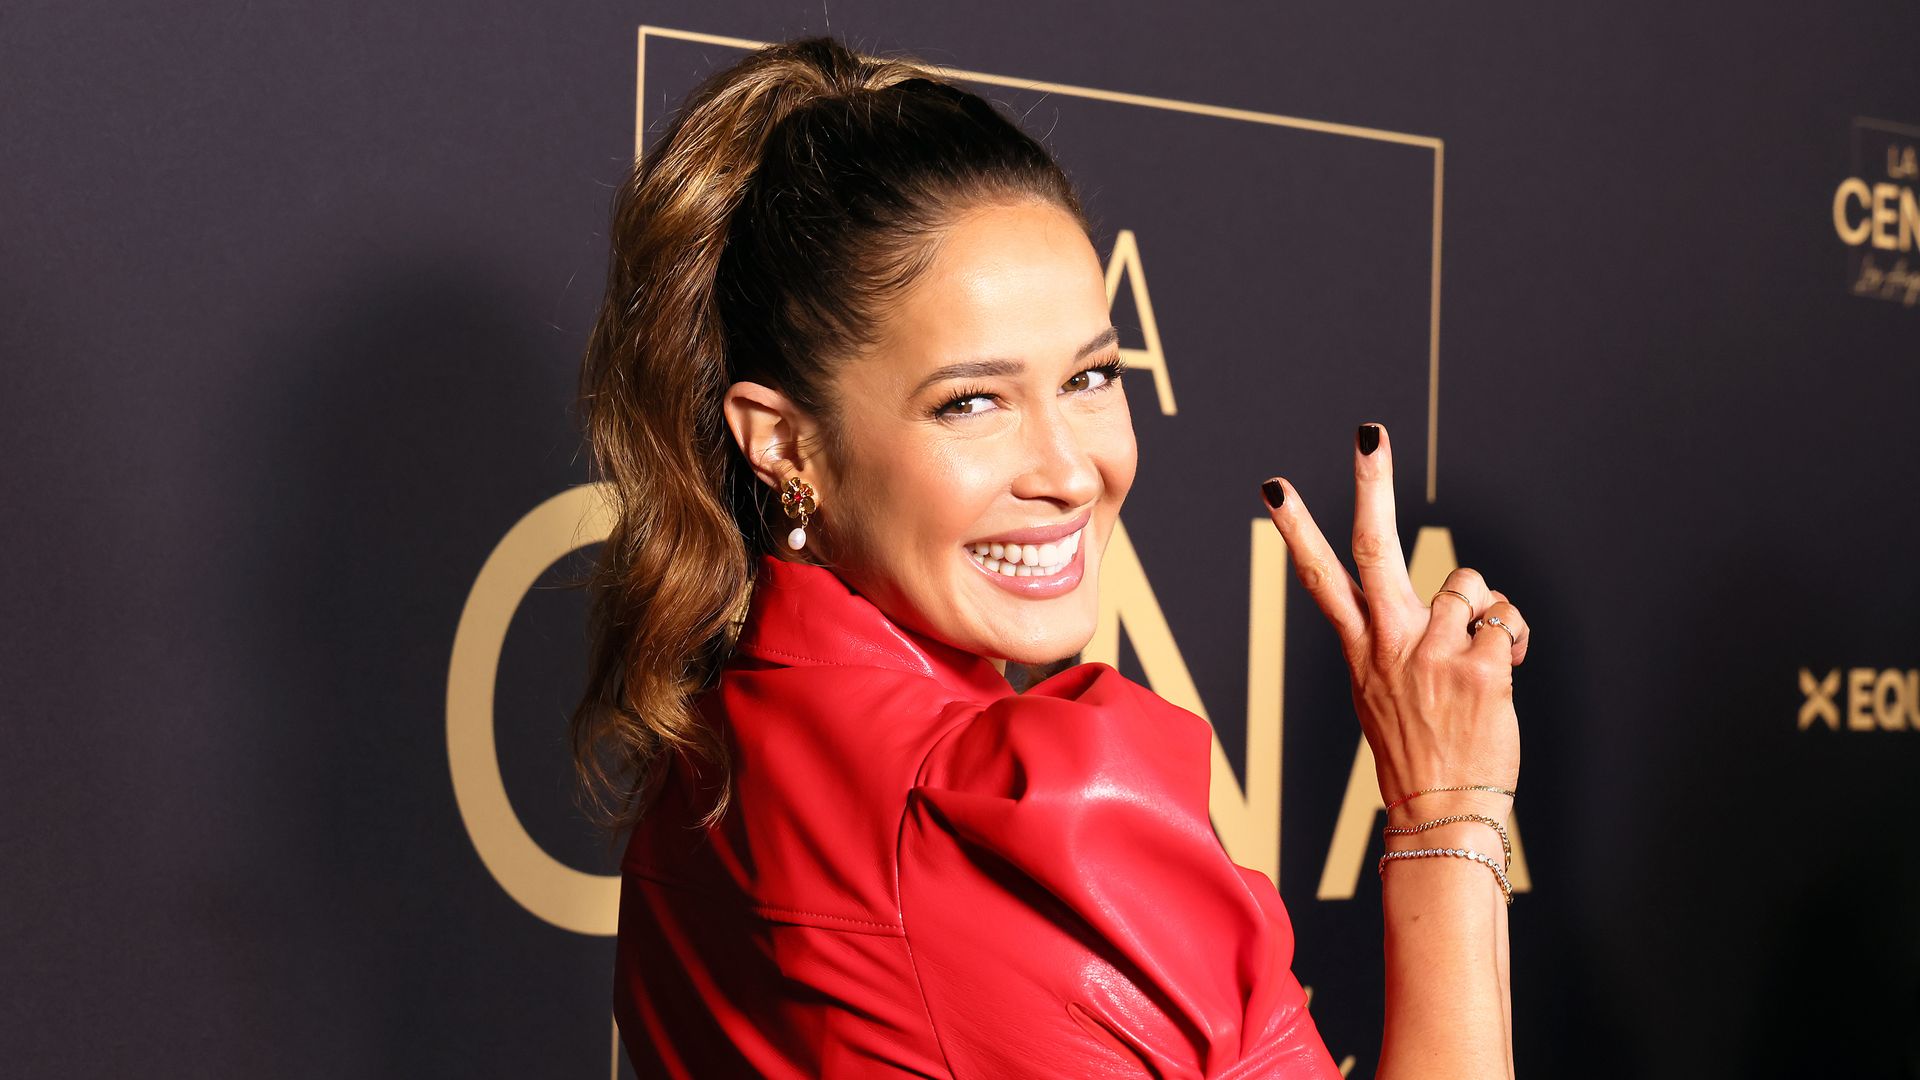 Jaina Lee Ortiz attends La Cena Los Angeles at NeueHouse Hollywood on January 05, 2024 in Hollywood, California. (Photo by Rodin Eckenroth/Getty Images for La Cena, celebrating Latino success in film and television)